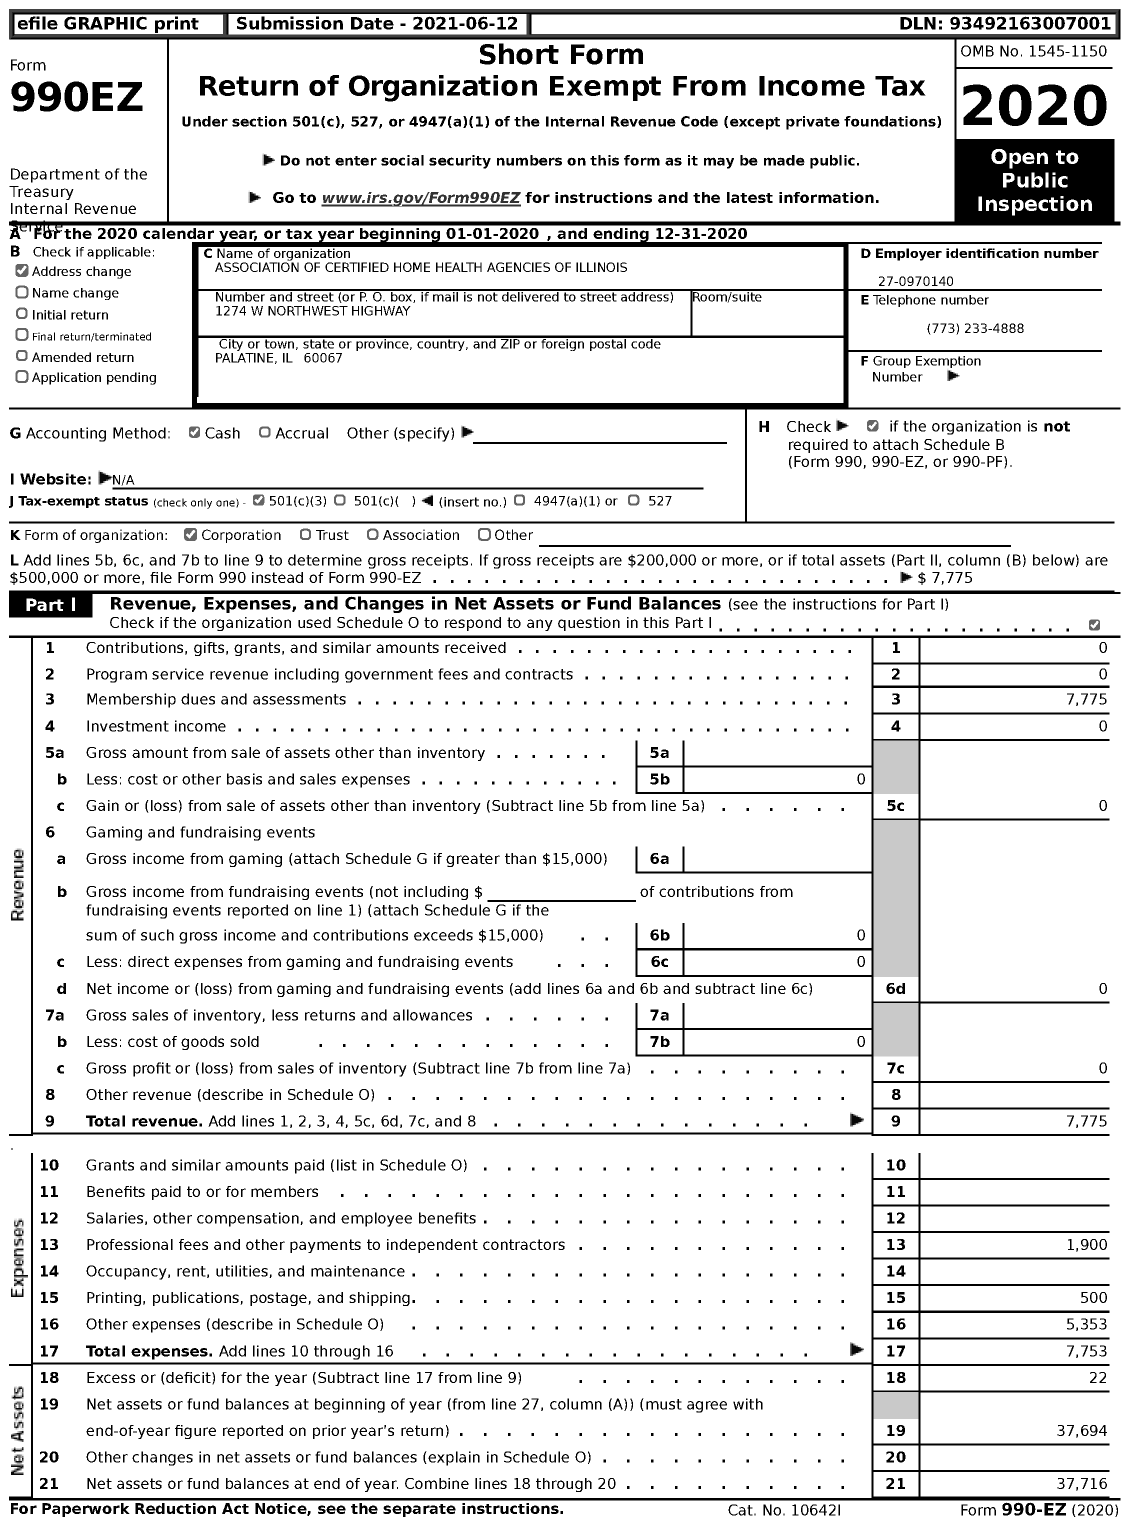 Image of first page of 2020 Form 990EZ for Association of Certified Home Health Agencies of Illinois